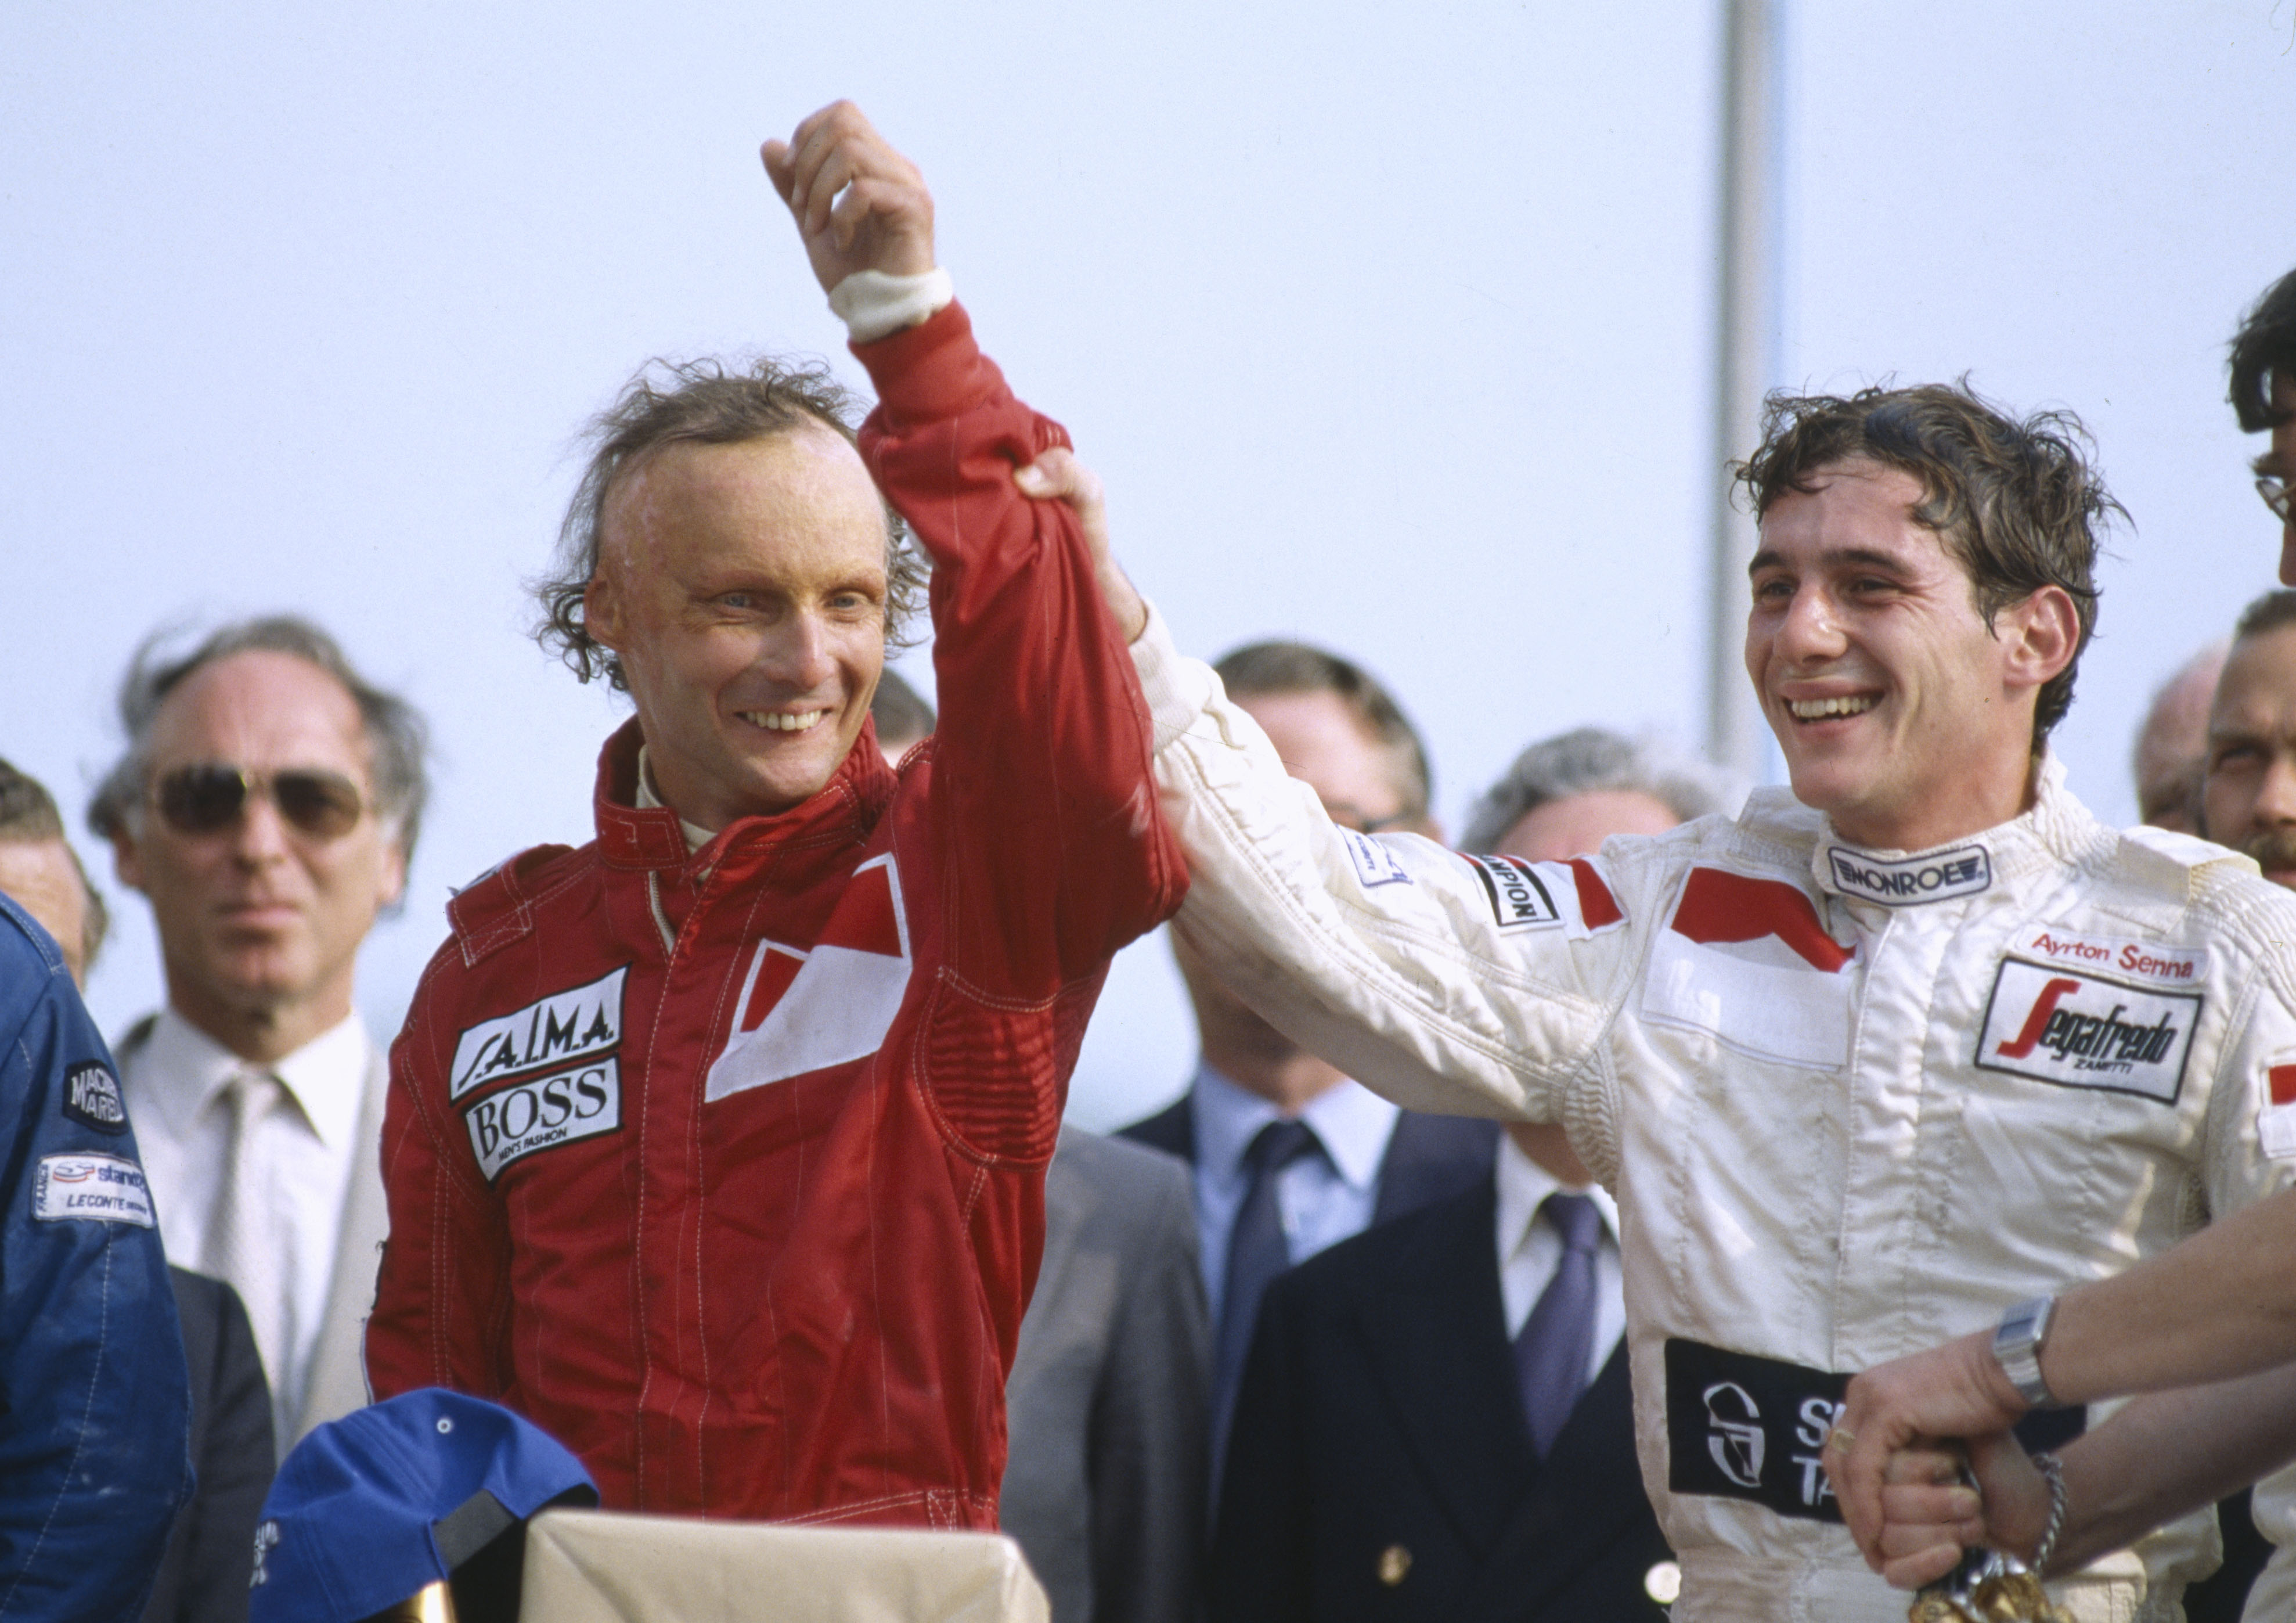 Niki Lauda and Ayrton Senna at the 1984 British Grand Prix at Brands Hatch circuit in Kent, England on 22nd July 1984 | Source: Getty Images